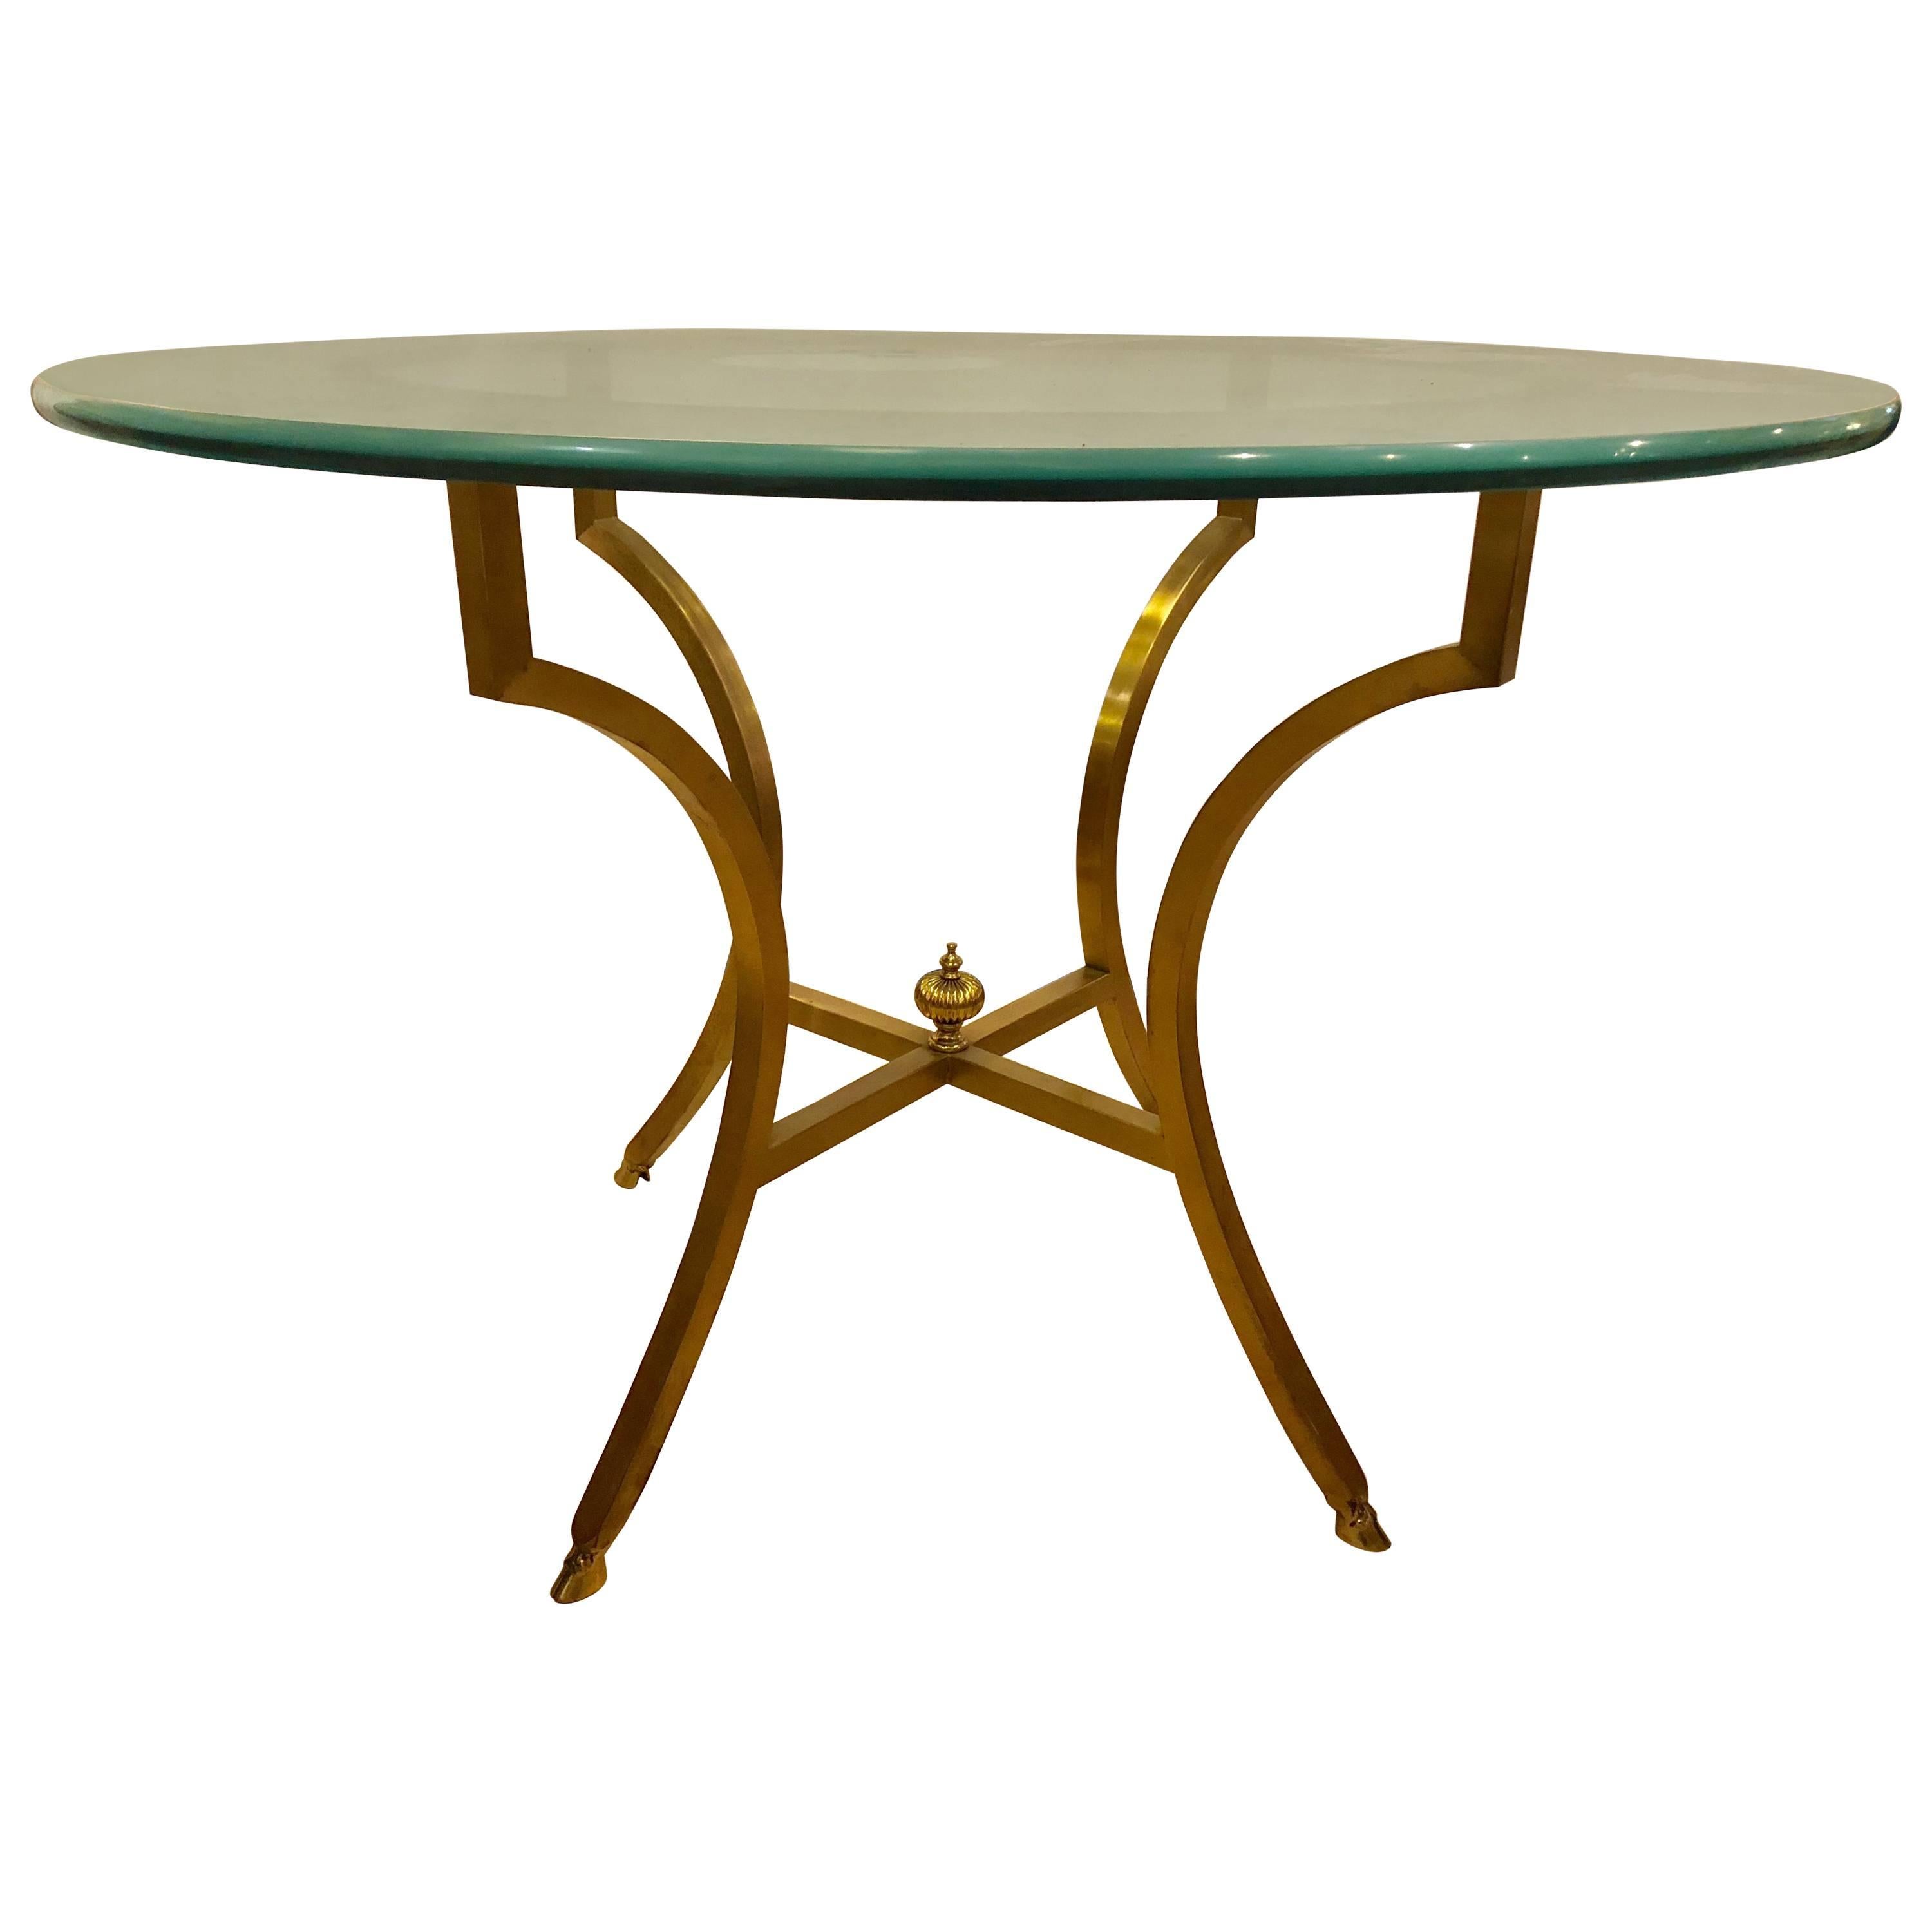 Hollywood Regency Style Glass Top Bronze Based Center Table or Dining Table